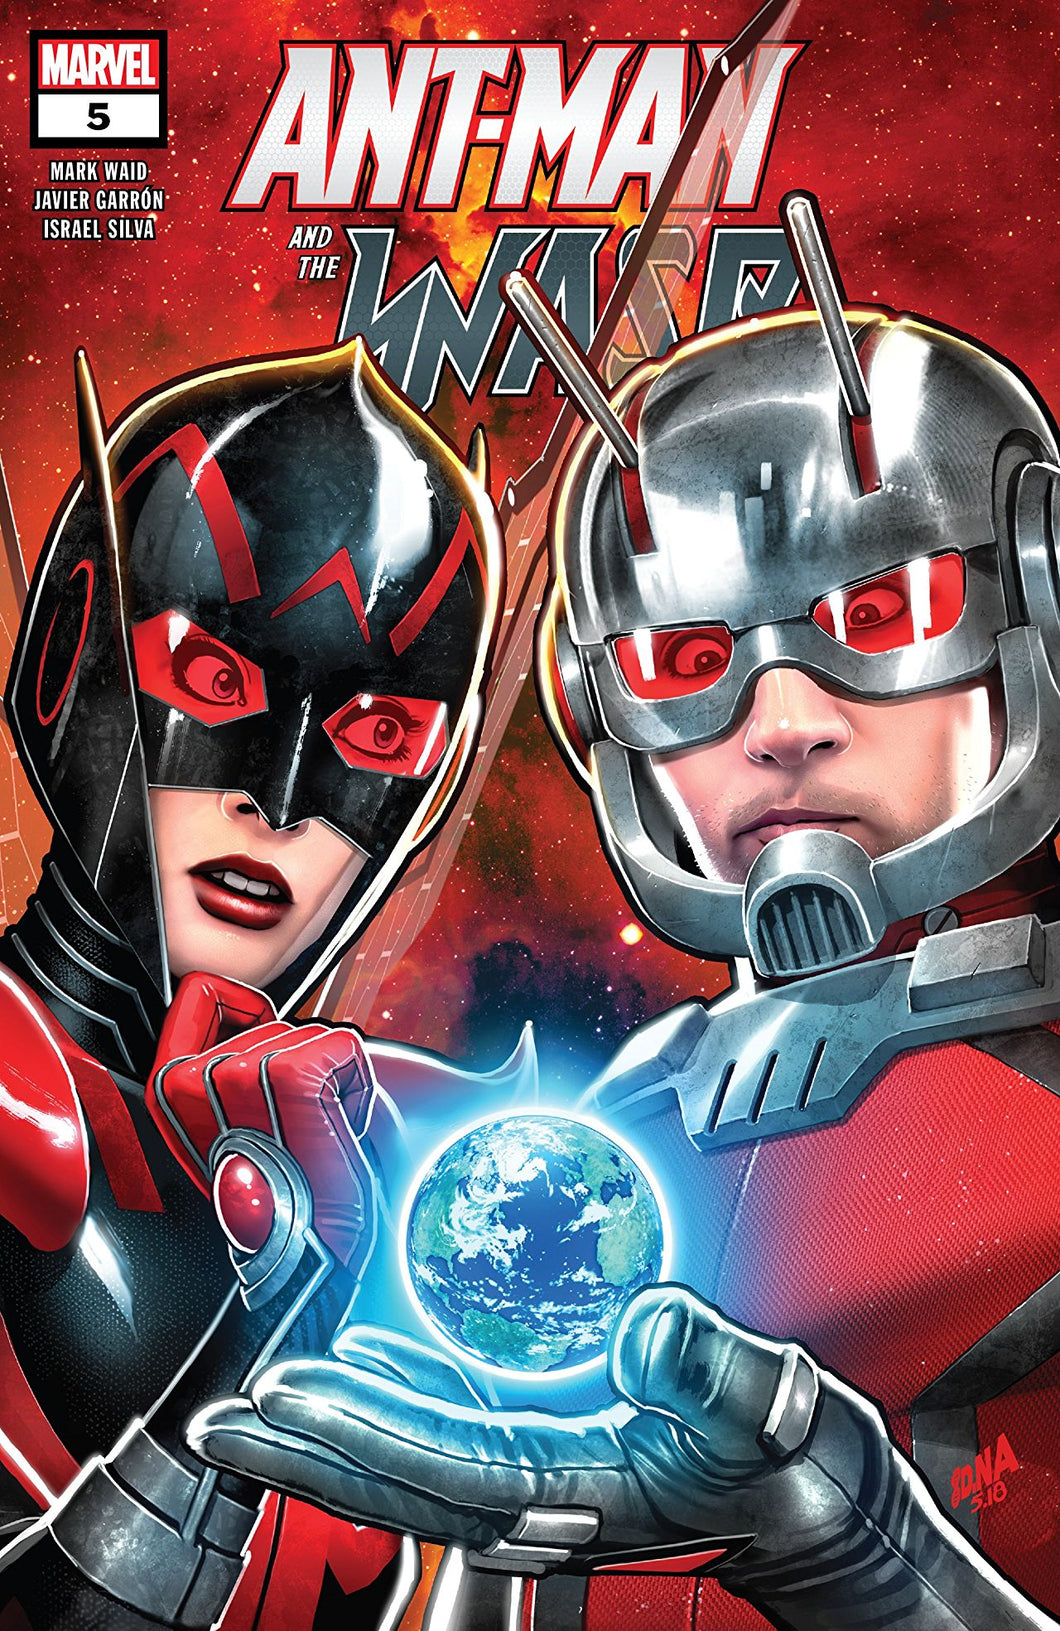 ANT-MAN AND THE WASP #5 (OF 5) (09/05/2018)